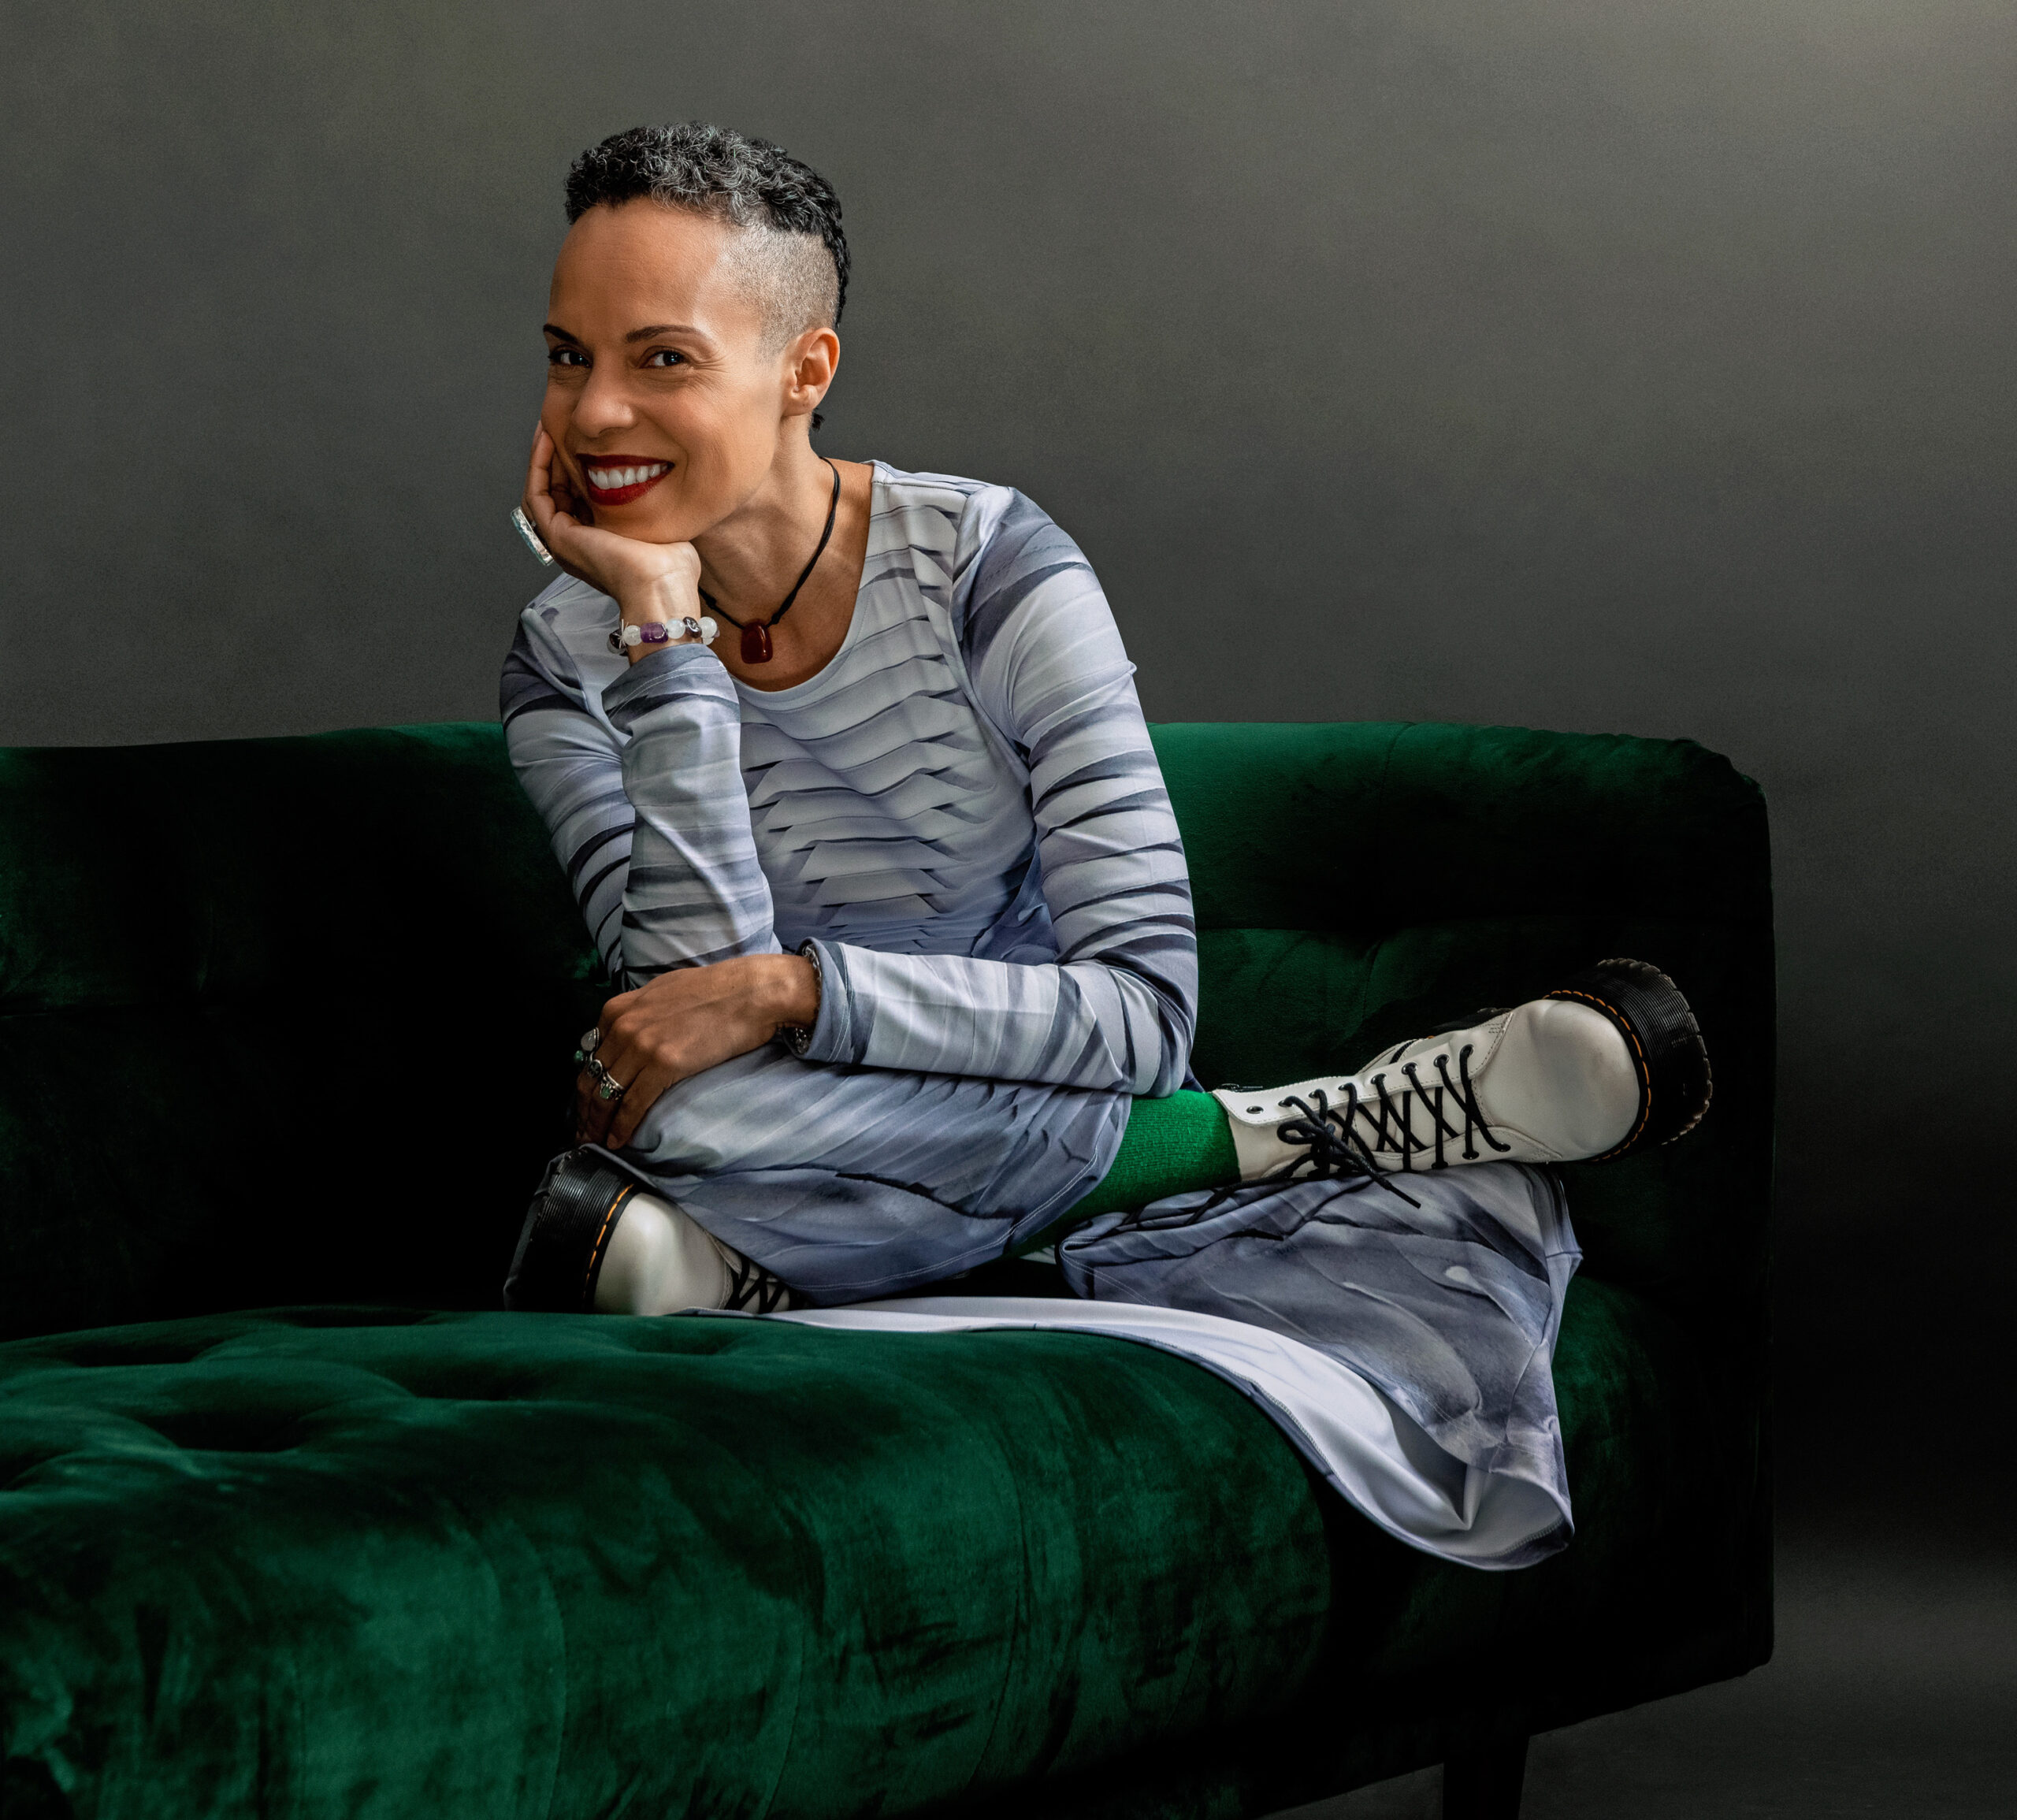 Tai Jimenez grins at the camera as she sits, legs folded under her, on a green velvet couch. She rests her chin in her hand, elbow propped on top of her knee. Her grey and black hair is shaved to a fade on the sides, the tight curls short on top. She wears a grey striped dress, white sneakers with black laces, and bright green socks.